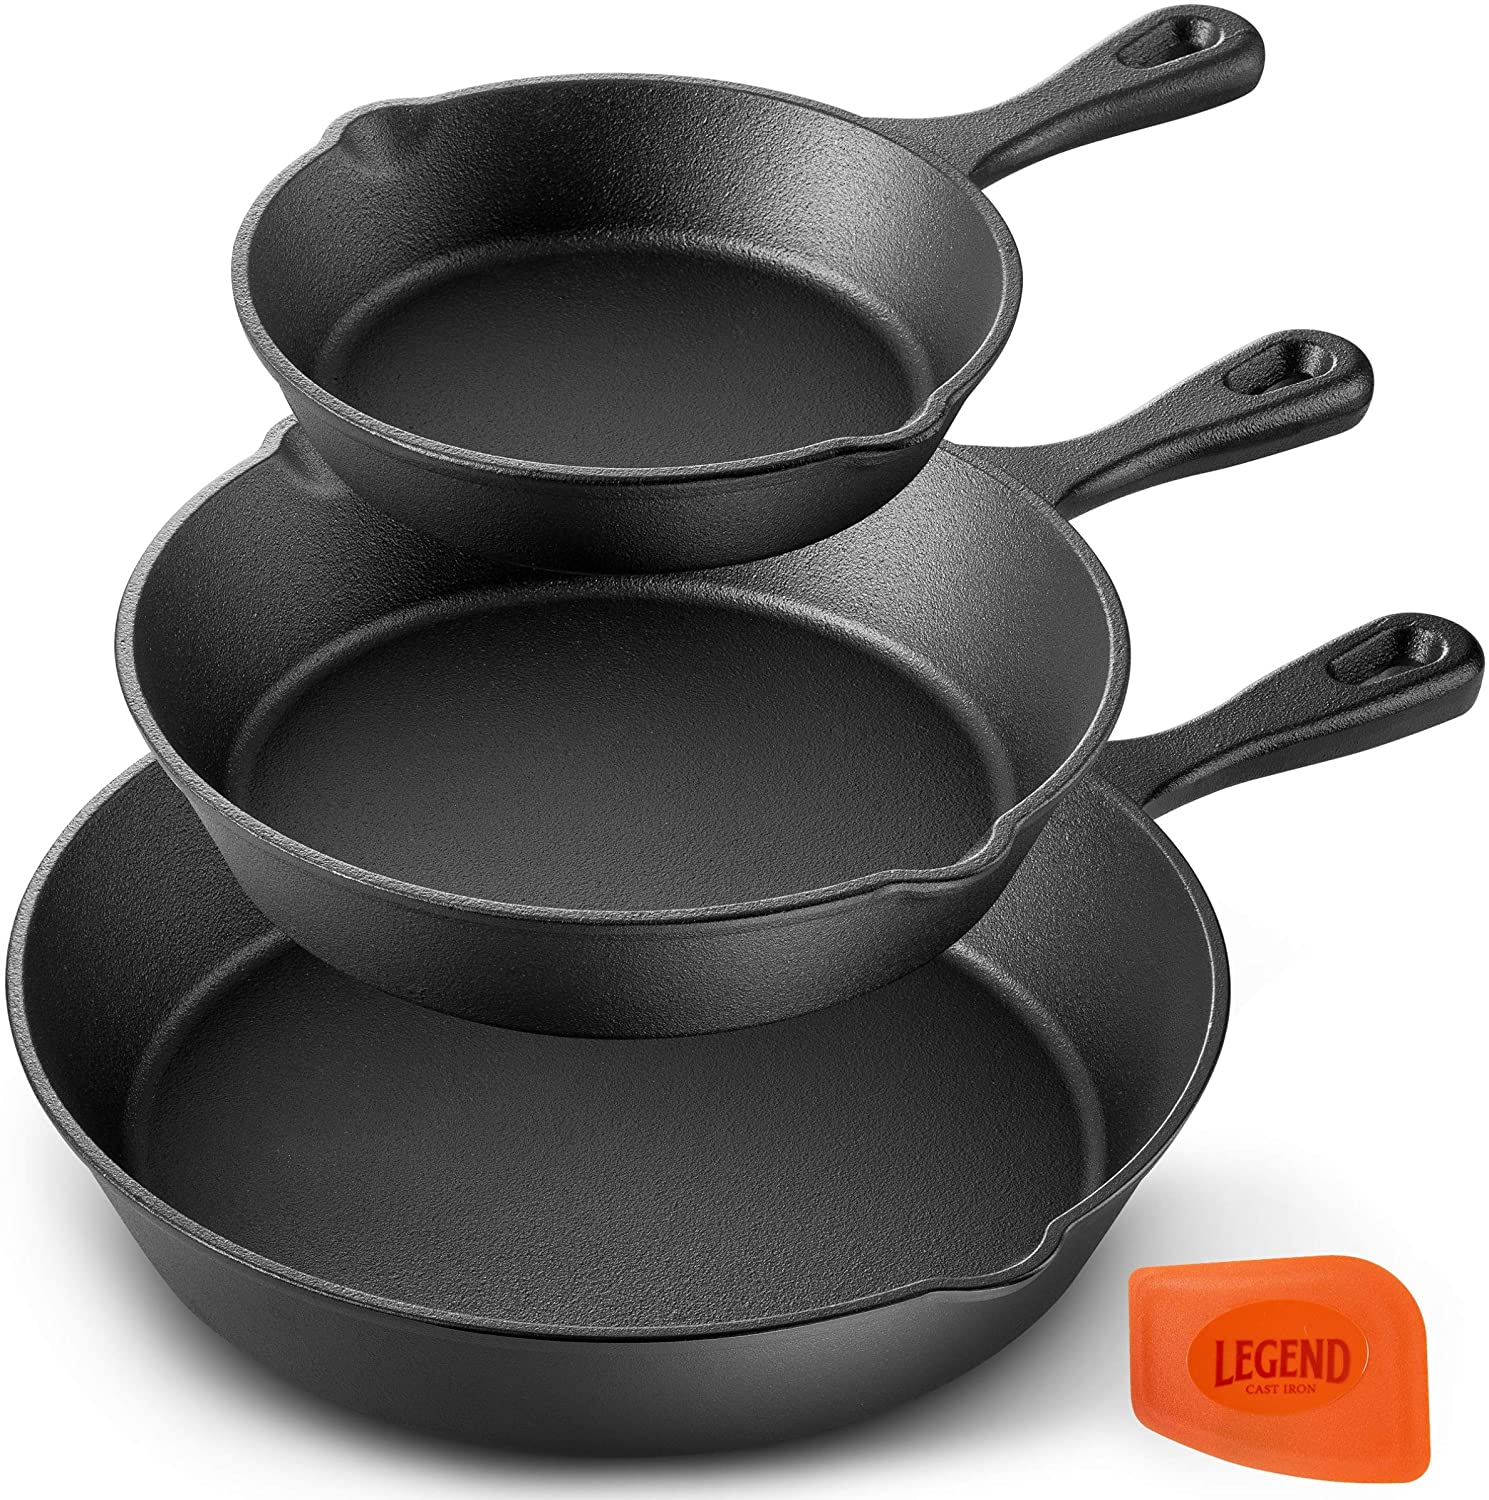 Cast Iron Skillet with Lid - 12-inch Pre-Seasoned Covered Frying Pan Set +  Silicone Handle & Lid Holders + Scraper/Cleaner - Indoor/Outdoor, Oven,  Stovetop, Camping Fire, Grill Safe Kitchen Cookware 